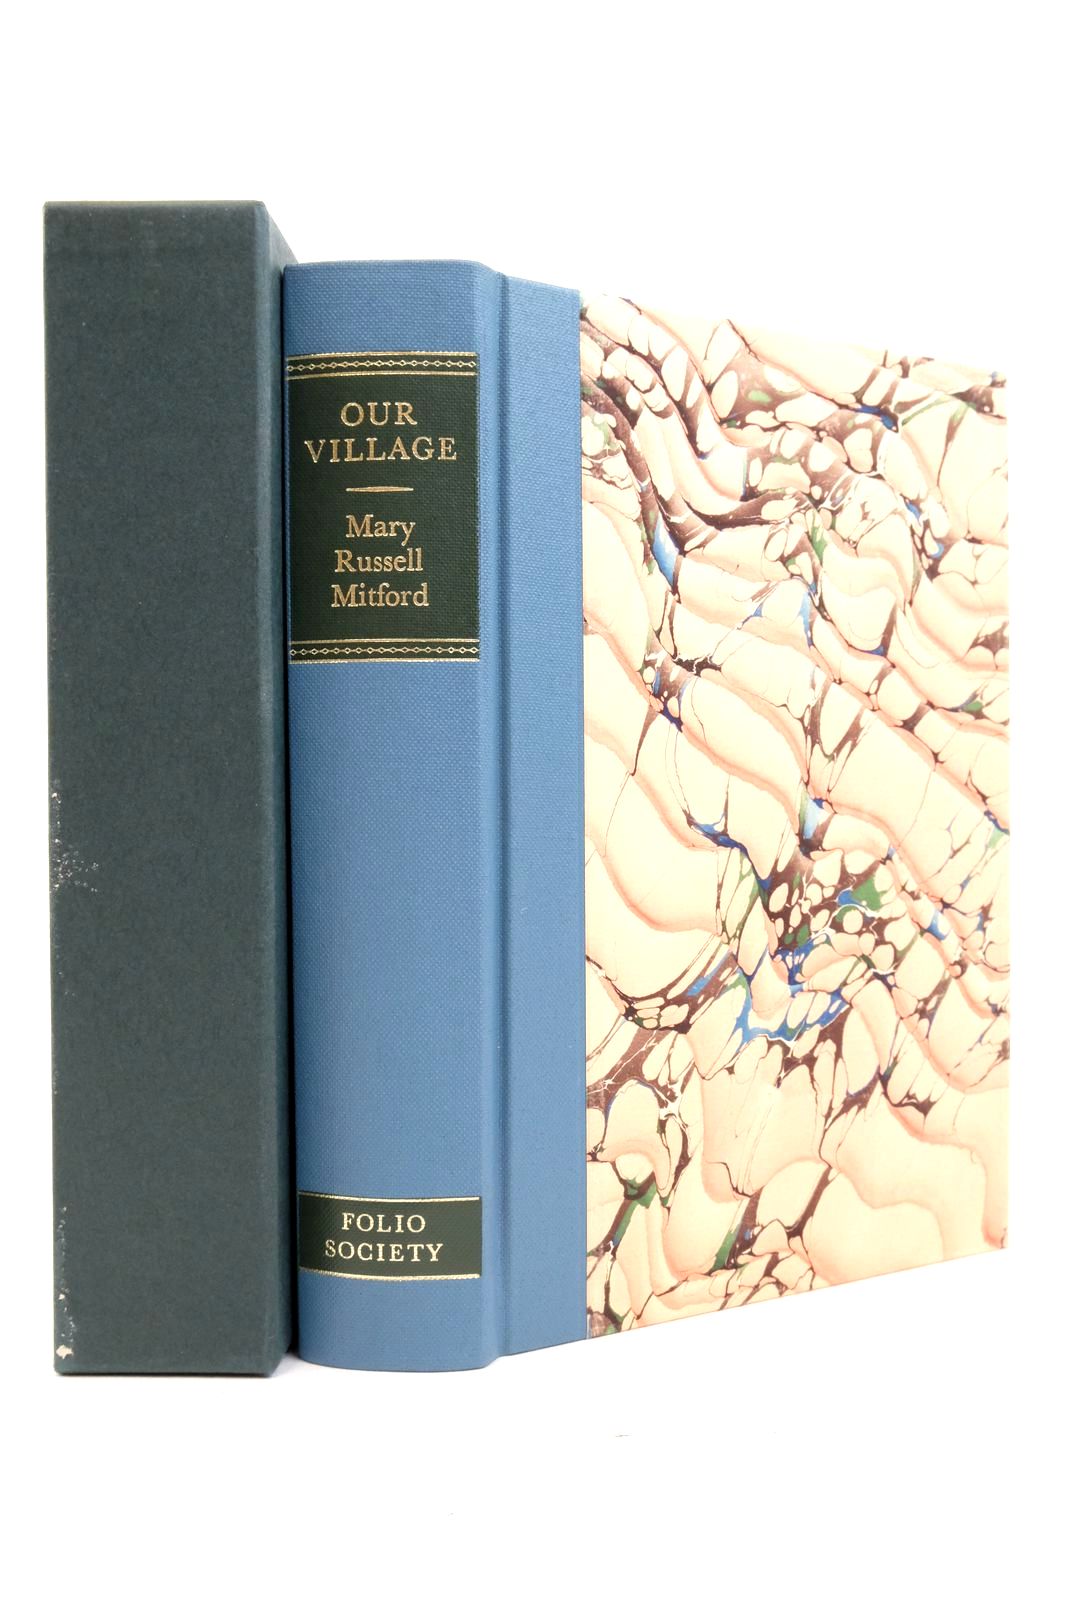 Photo of OUR VILLAGE written by Mitford, Mary Russell Blythe, Ronald illustrated by Hassall, Joan published by Folio Society (STOCK CODE: 2138119)  for sale by Stella & Rose's Books